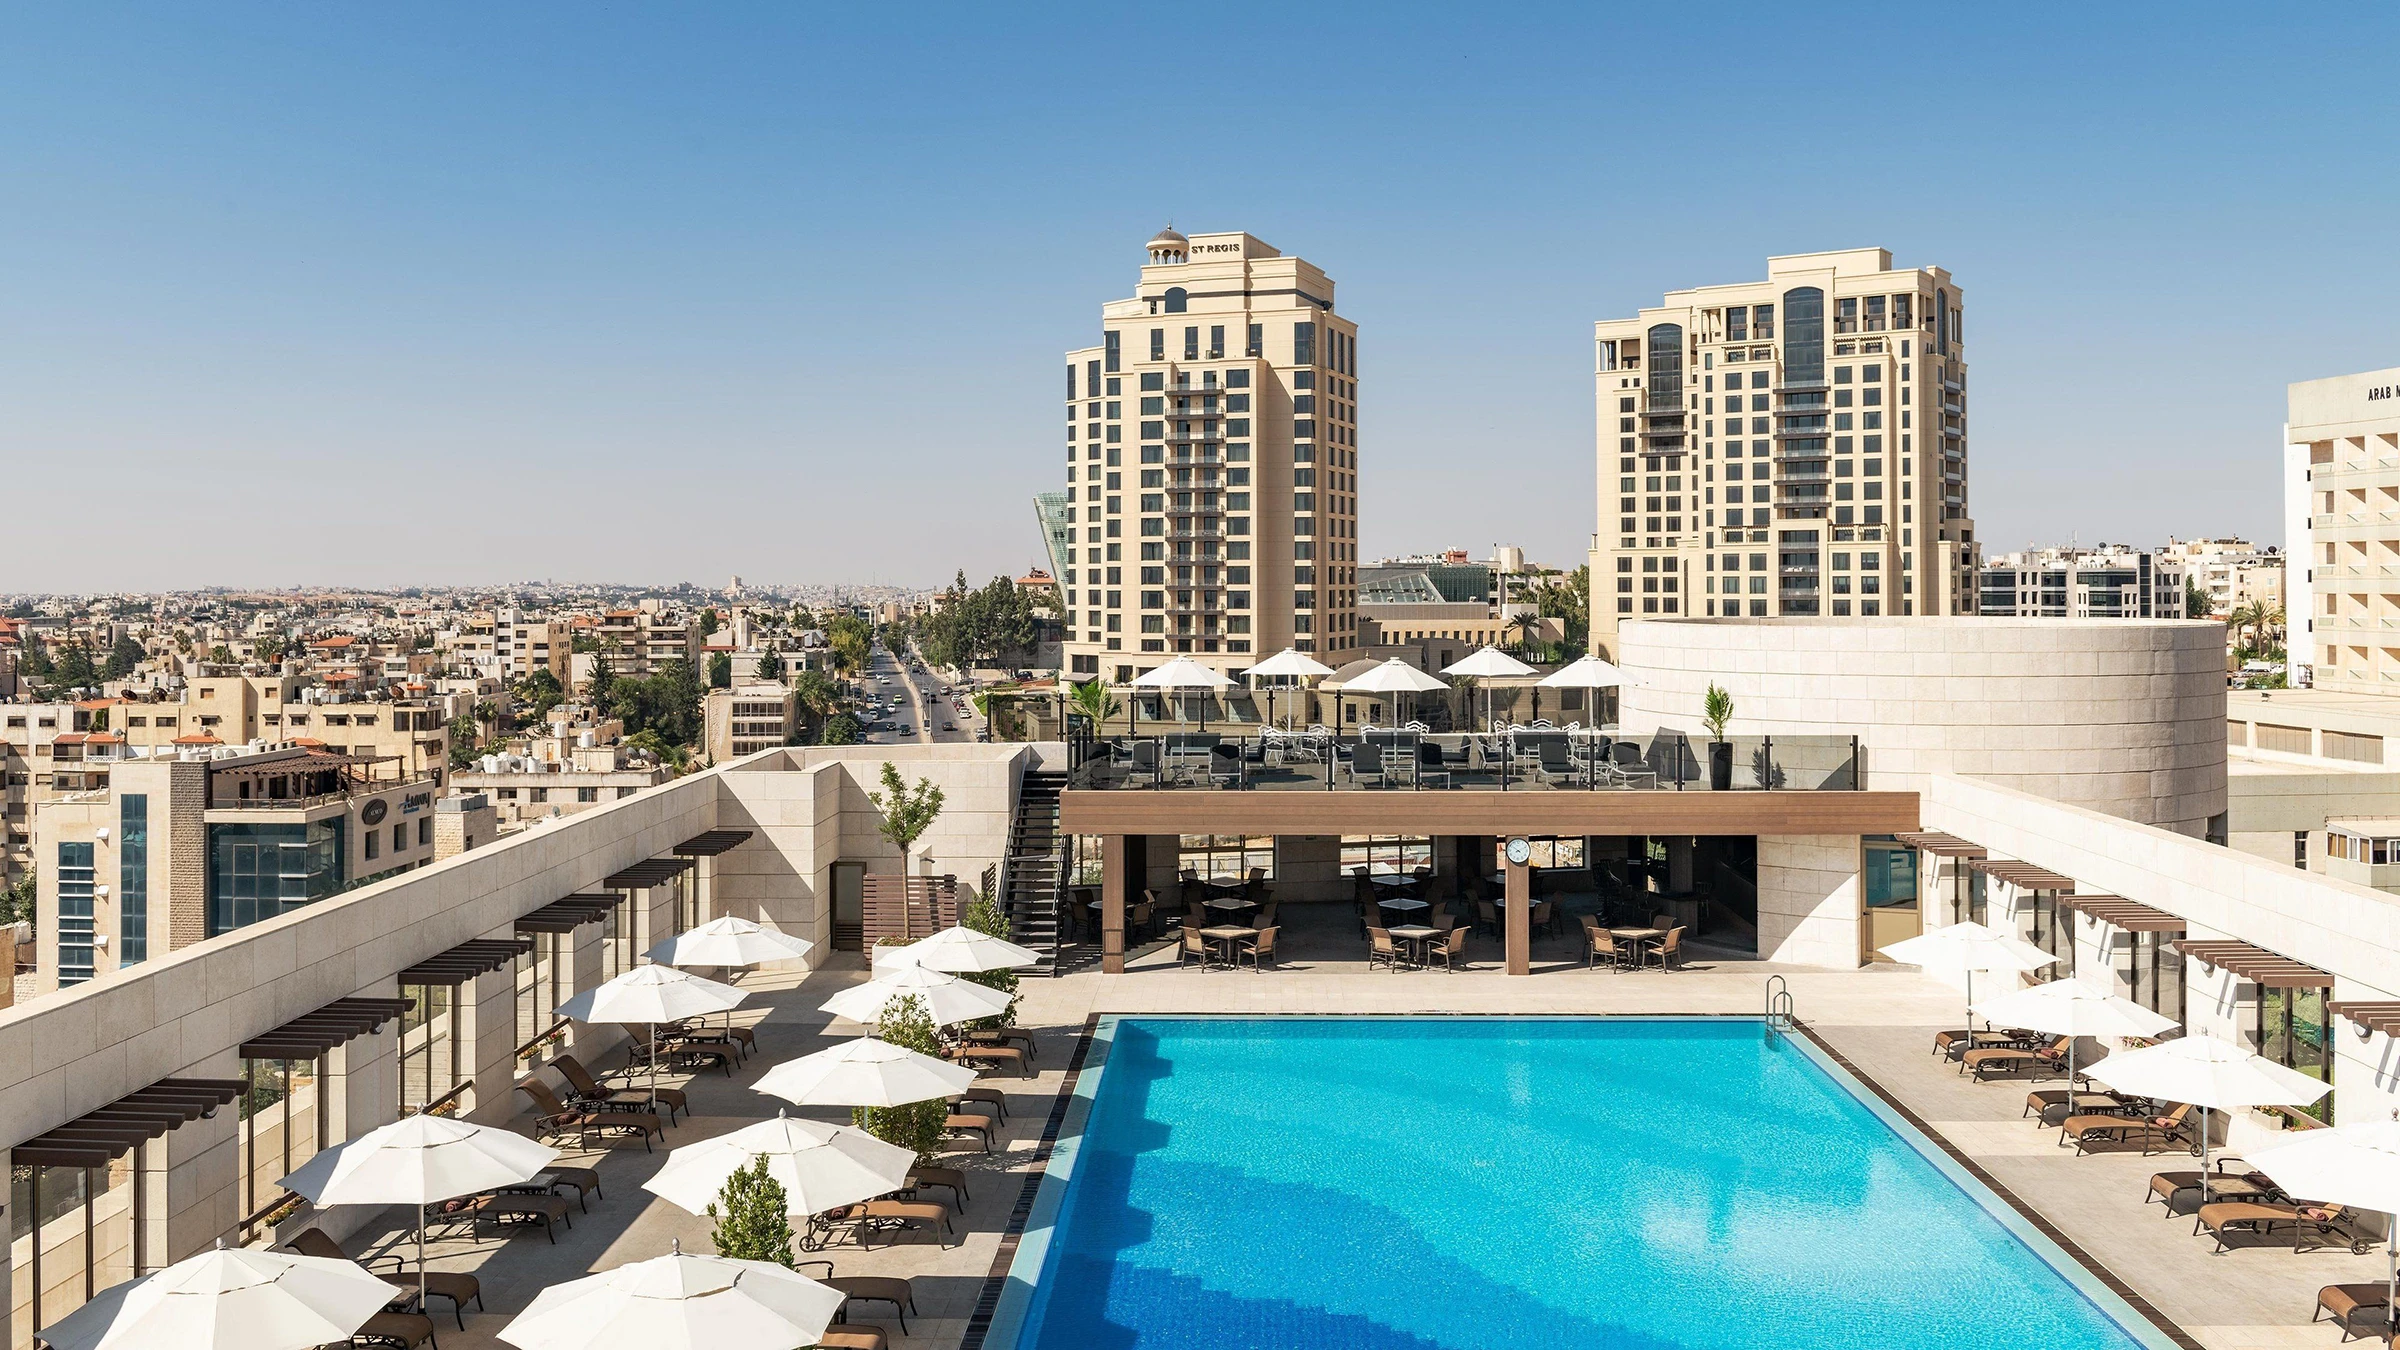 14 Stunning Examples of Amazing Hotels in Amman